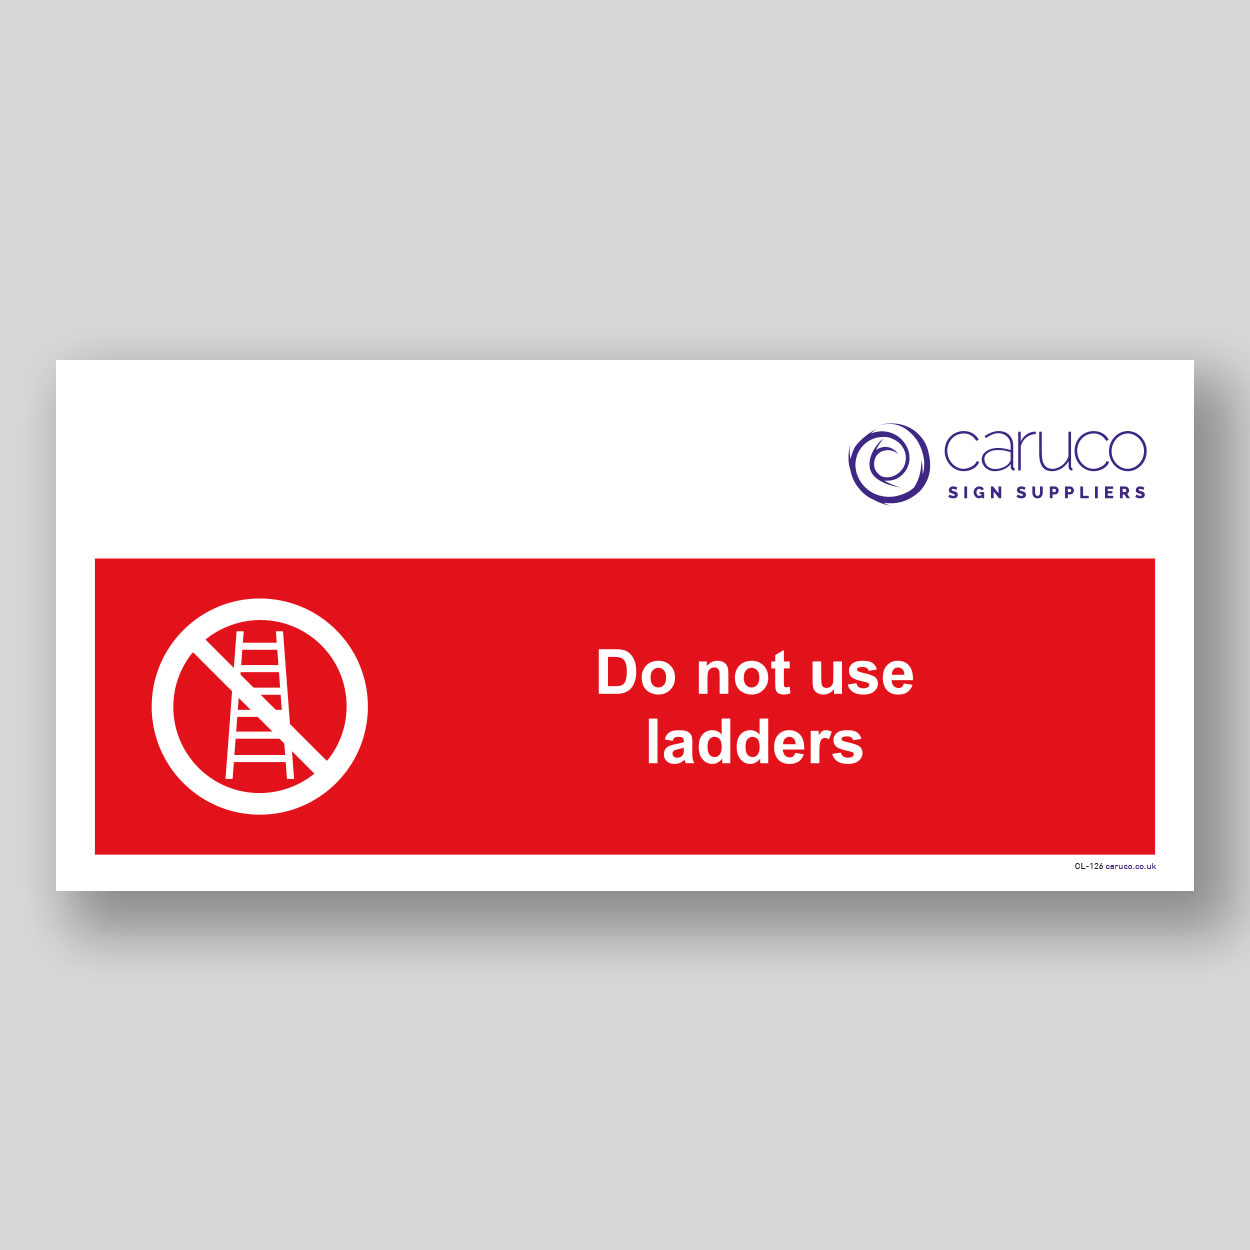 CL-126 Do not use ladders